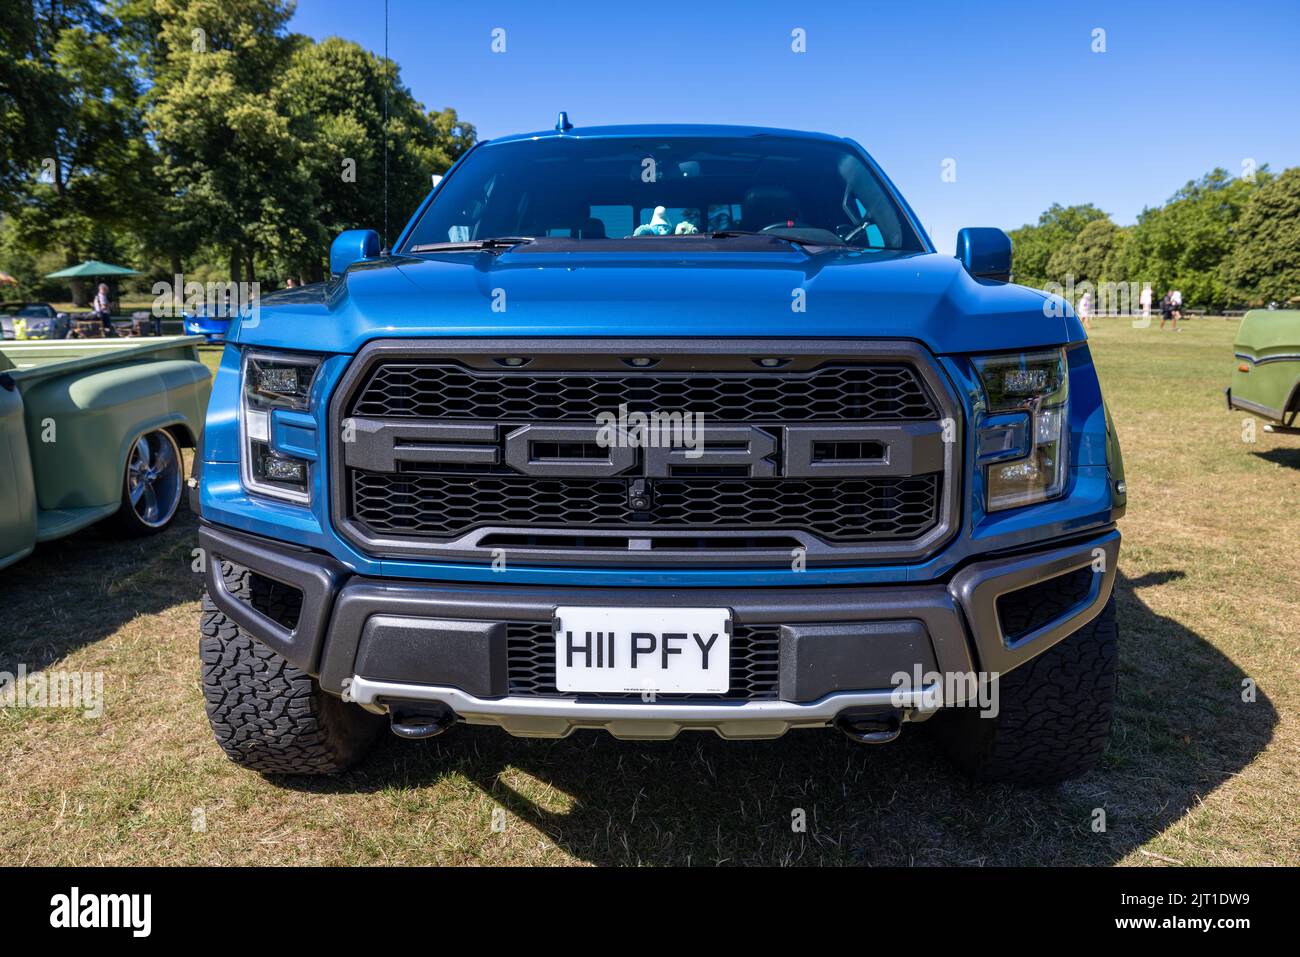 Ford Raptor pick-up truck, on display at the American Auto Club Rally of the Giants, held at Blenheim Palace on the 10 July 2022 Stock Photo